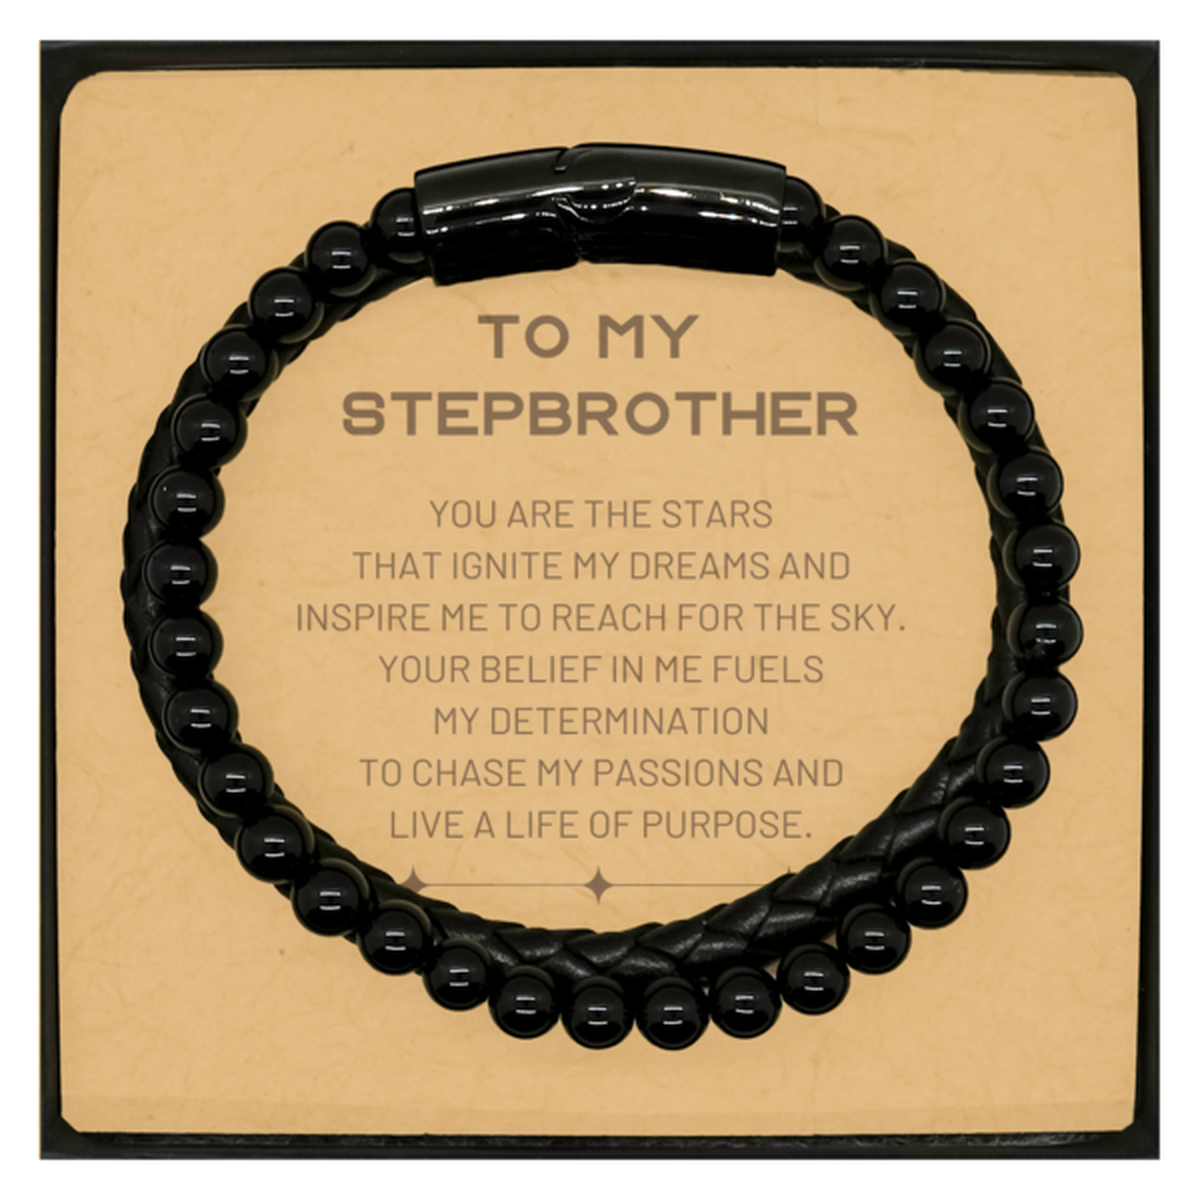 To My Stepbrother Stone Leather Bracelets, You are the stars that ignite my dreams and inspire me to reach for the sky, Birthday Christmas Unique Gifts For Stepbrother, Thank You Gifts For Stepbrother